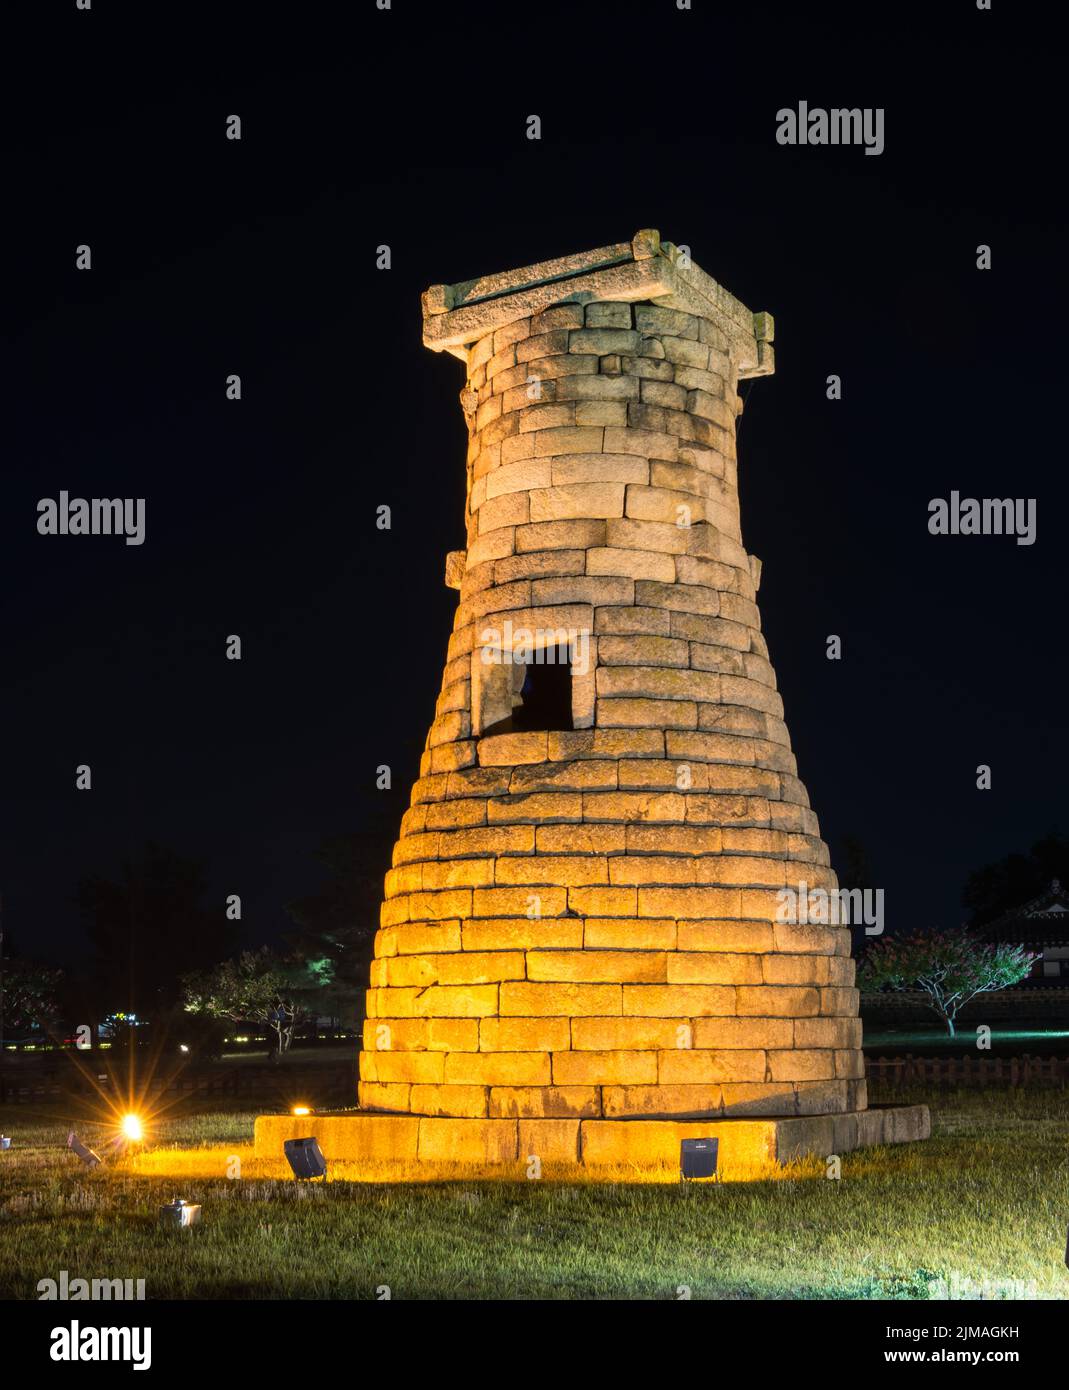 Cheomseongdae Observatory for more than 1,000 years in Gyeongju. night view Stock Photo